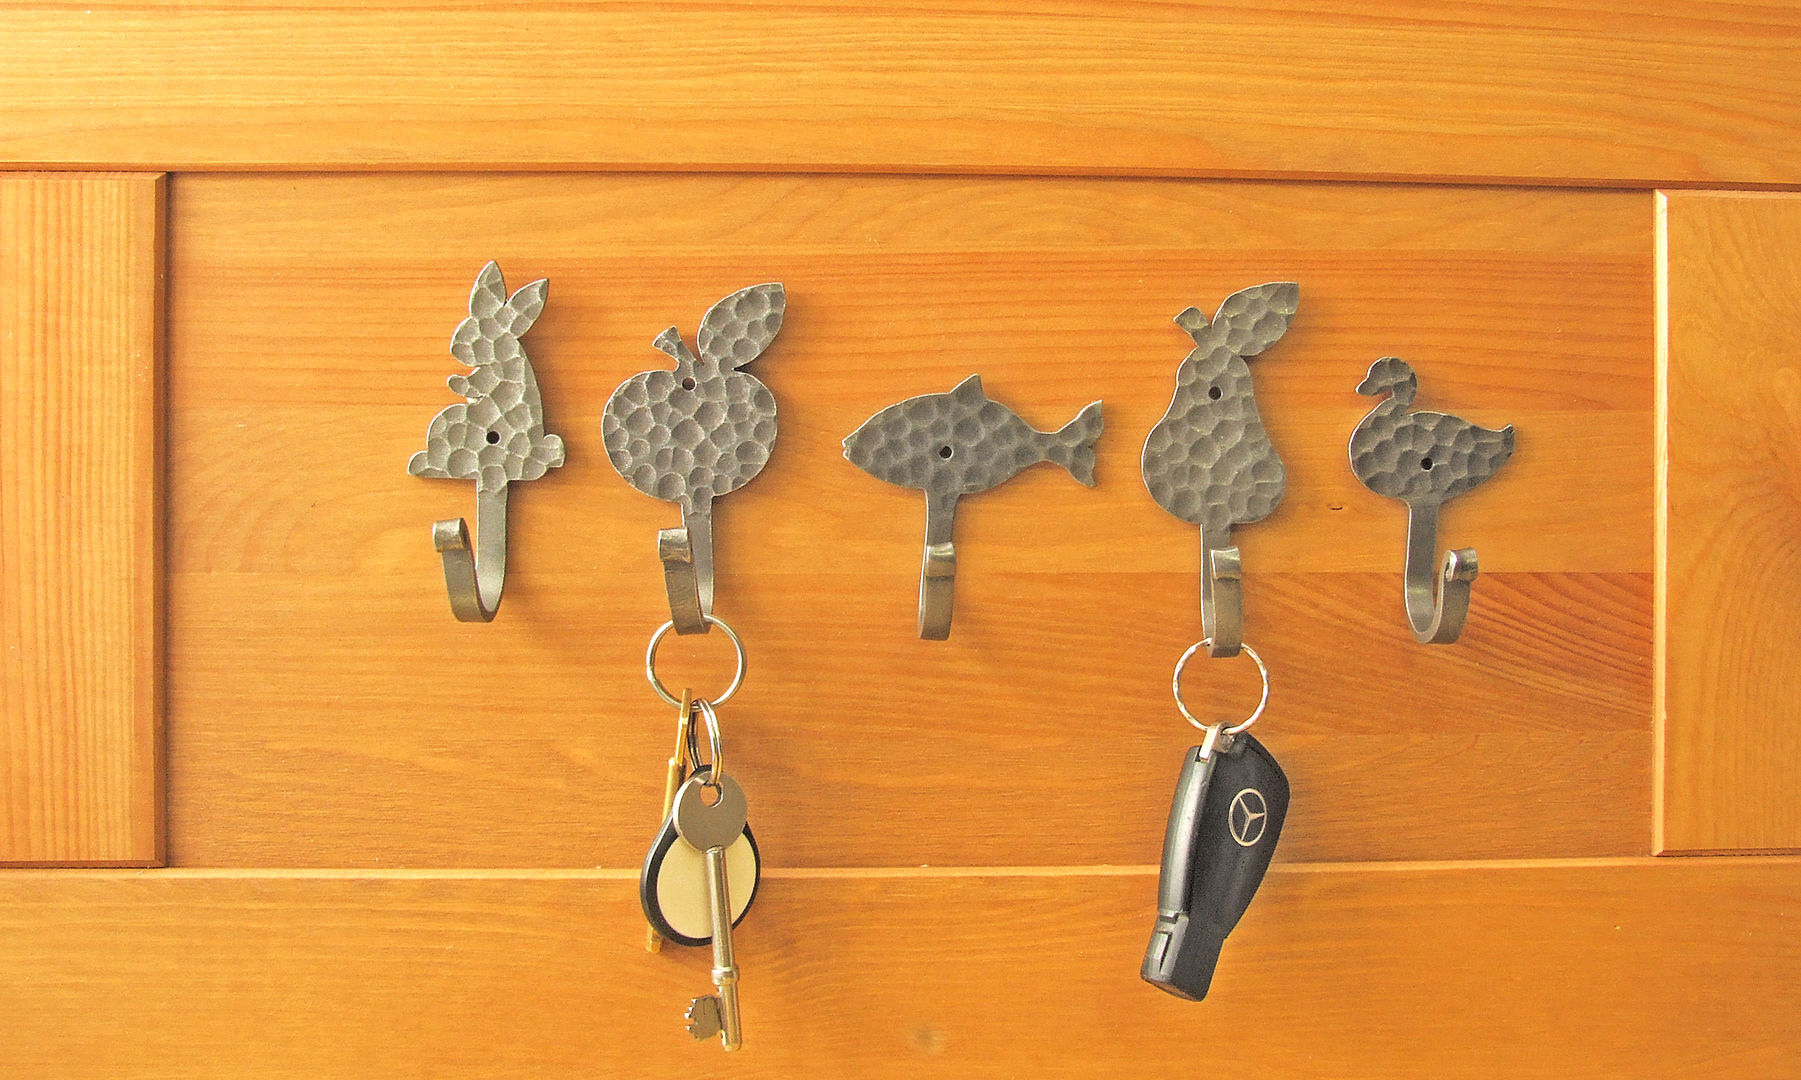 Hooks for keys or cups or for what ever you want... Clayton Munroe Puertas eclécticas Hierro/Acero Manillas y accesorios